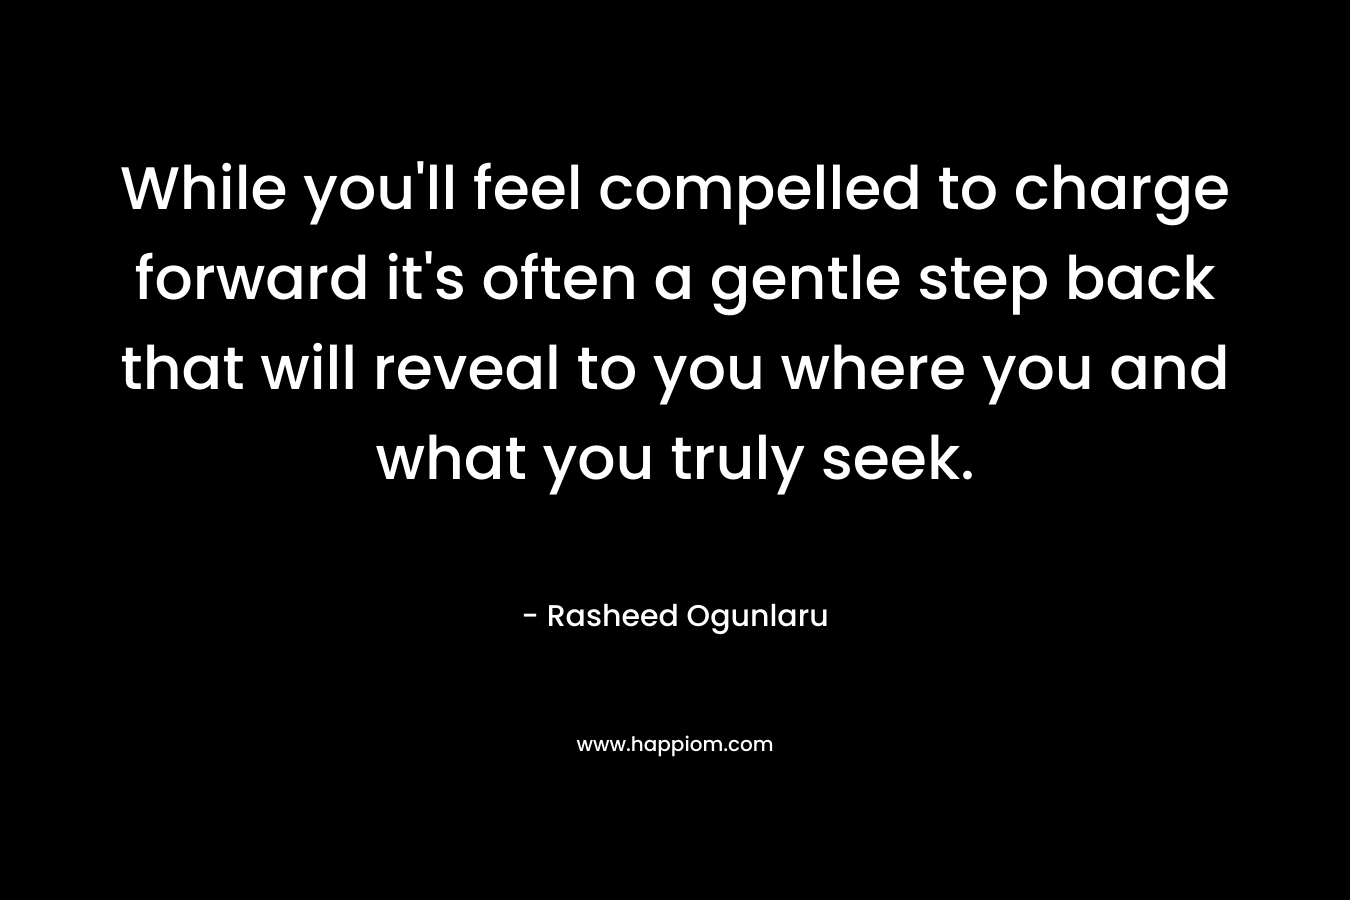 While you'll feel compelled to charge forward it's often a gentle step back that will reveal to you where you and what you truly seek.